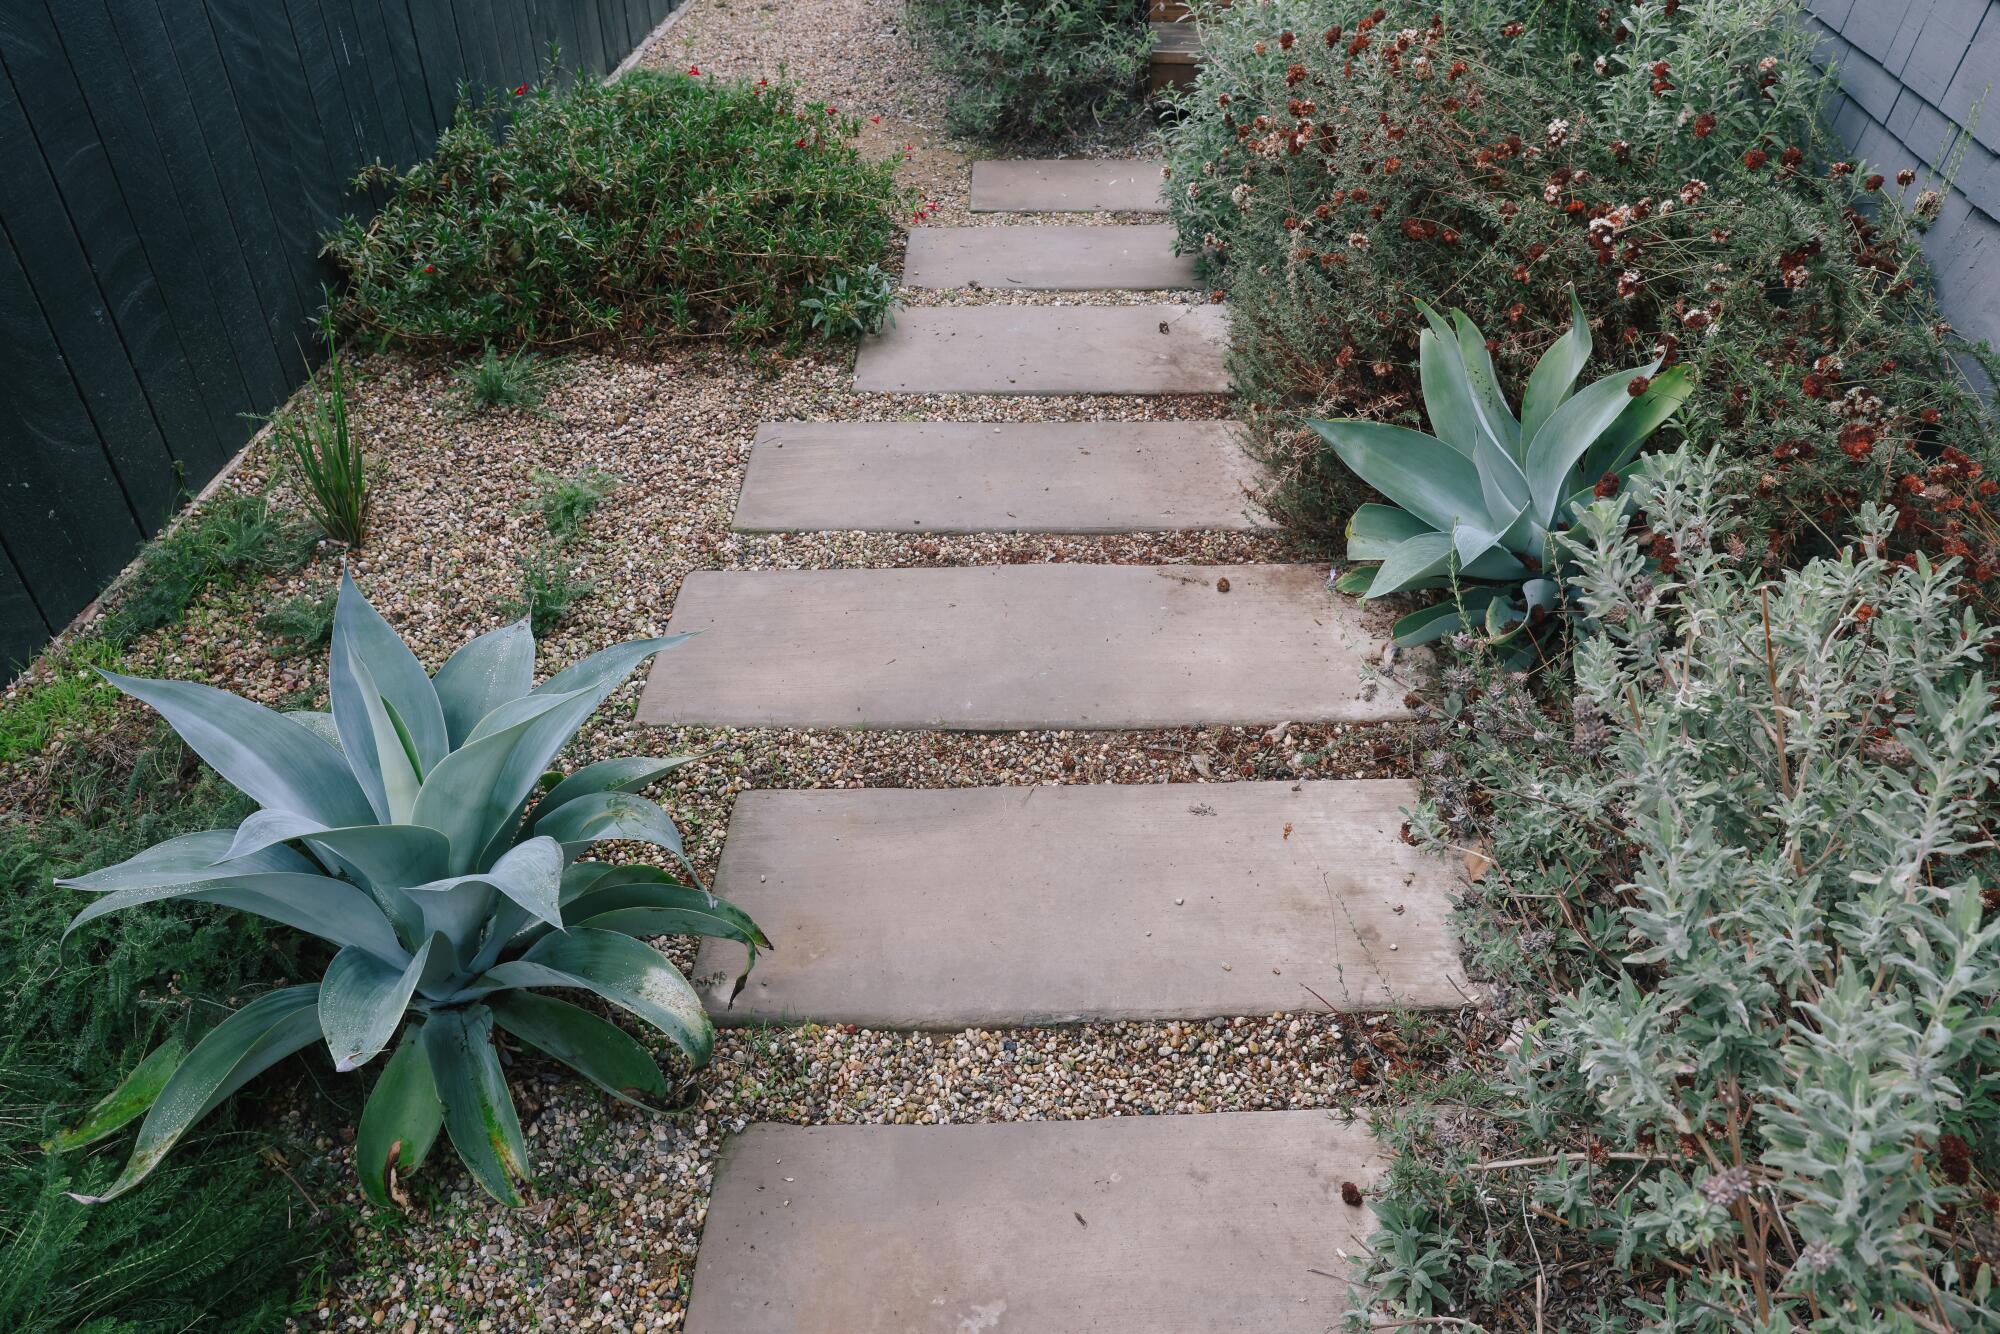 Different plants grow along a path of concrete squares interspersed with gravel